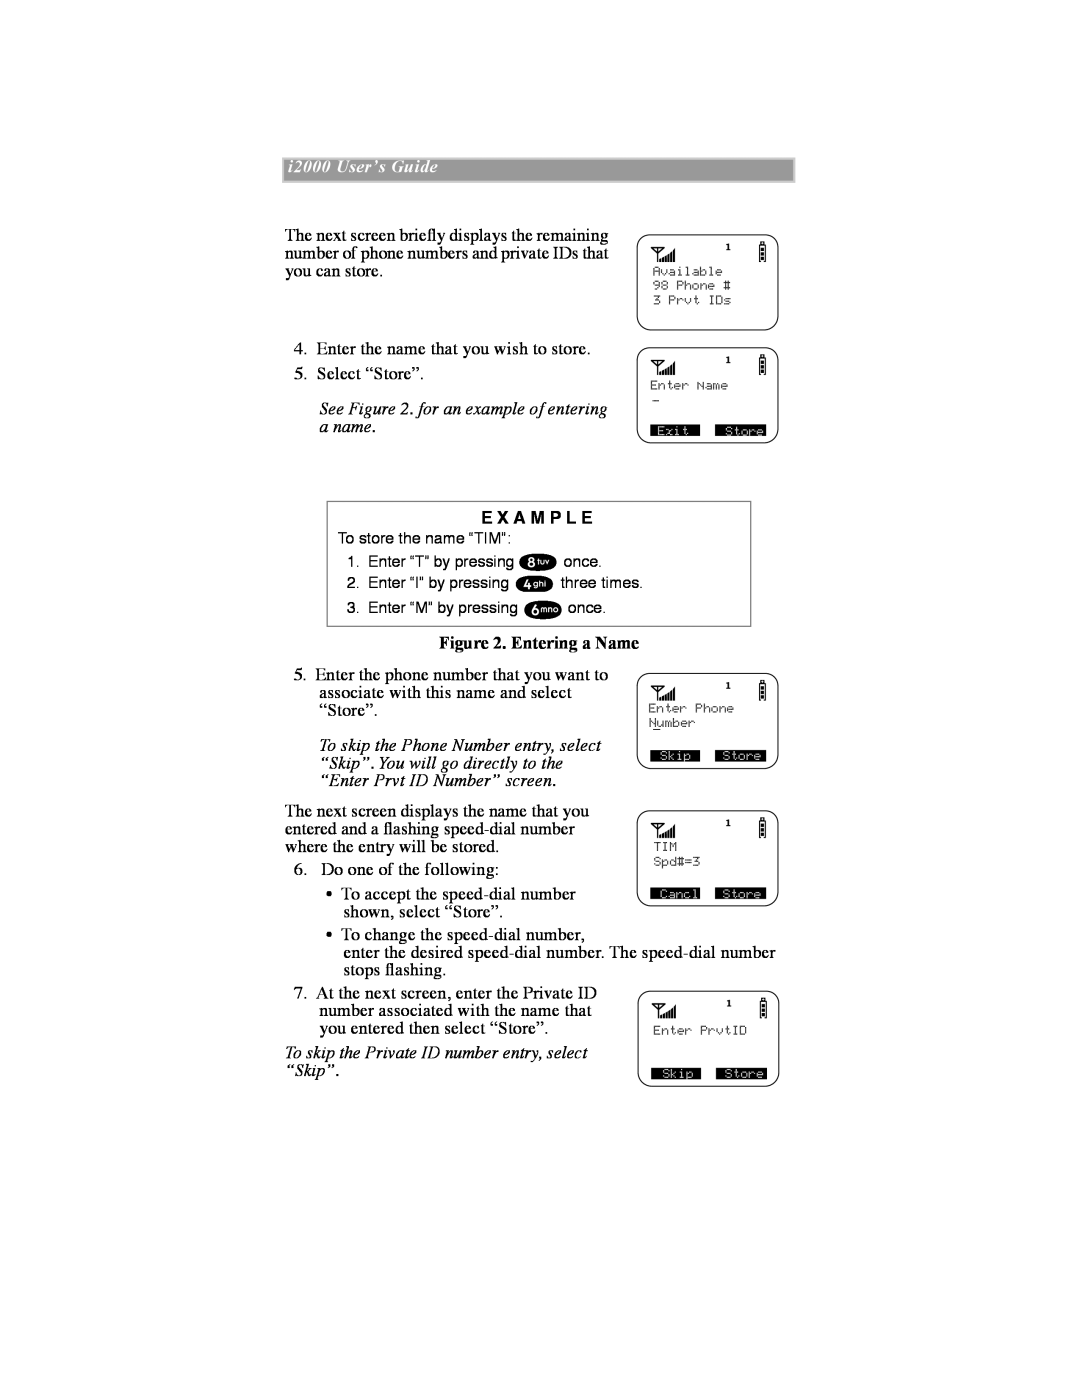 Motorola iDEN manual See . for an example of entering a name, E X A M P L E, Entering a Name, i2000 UserÕs Guide 